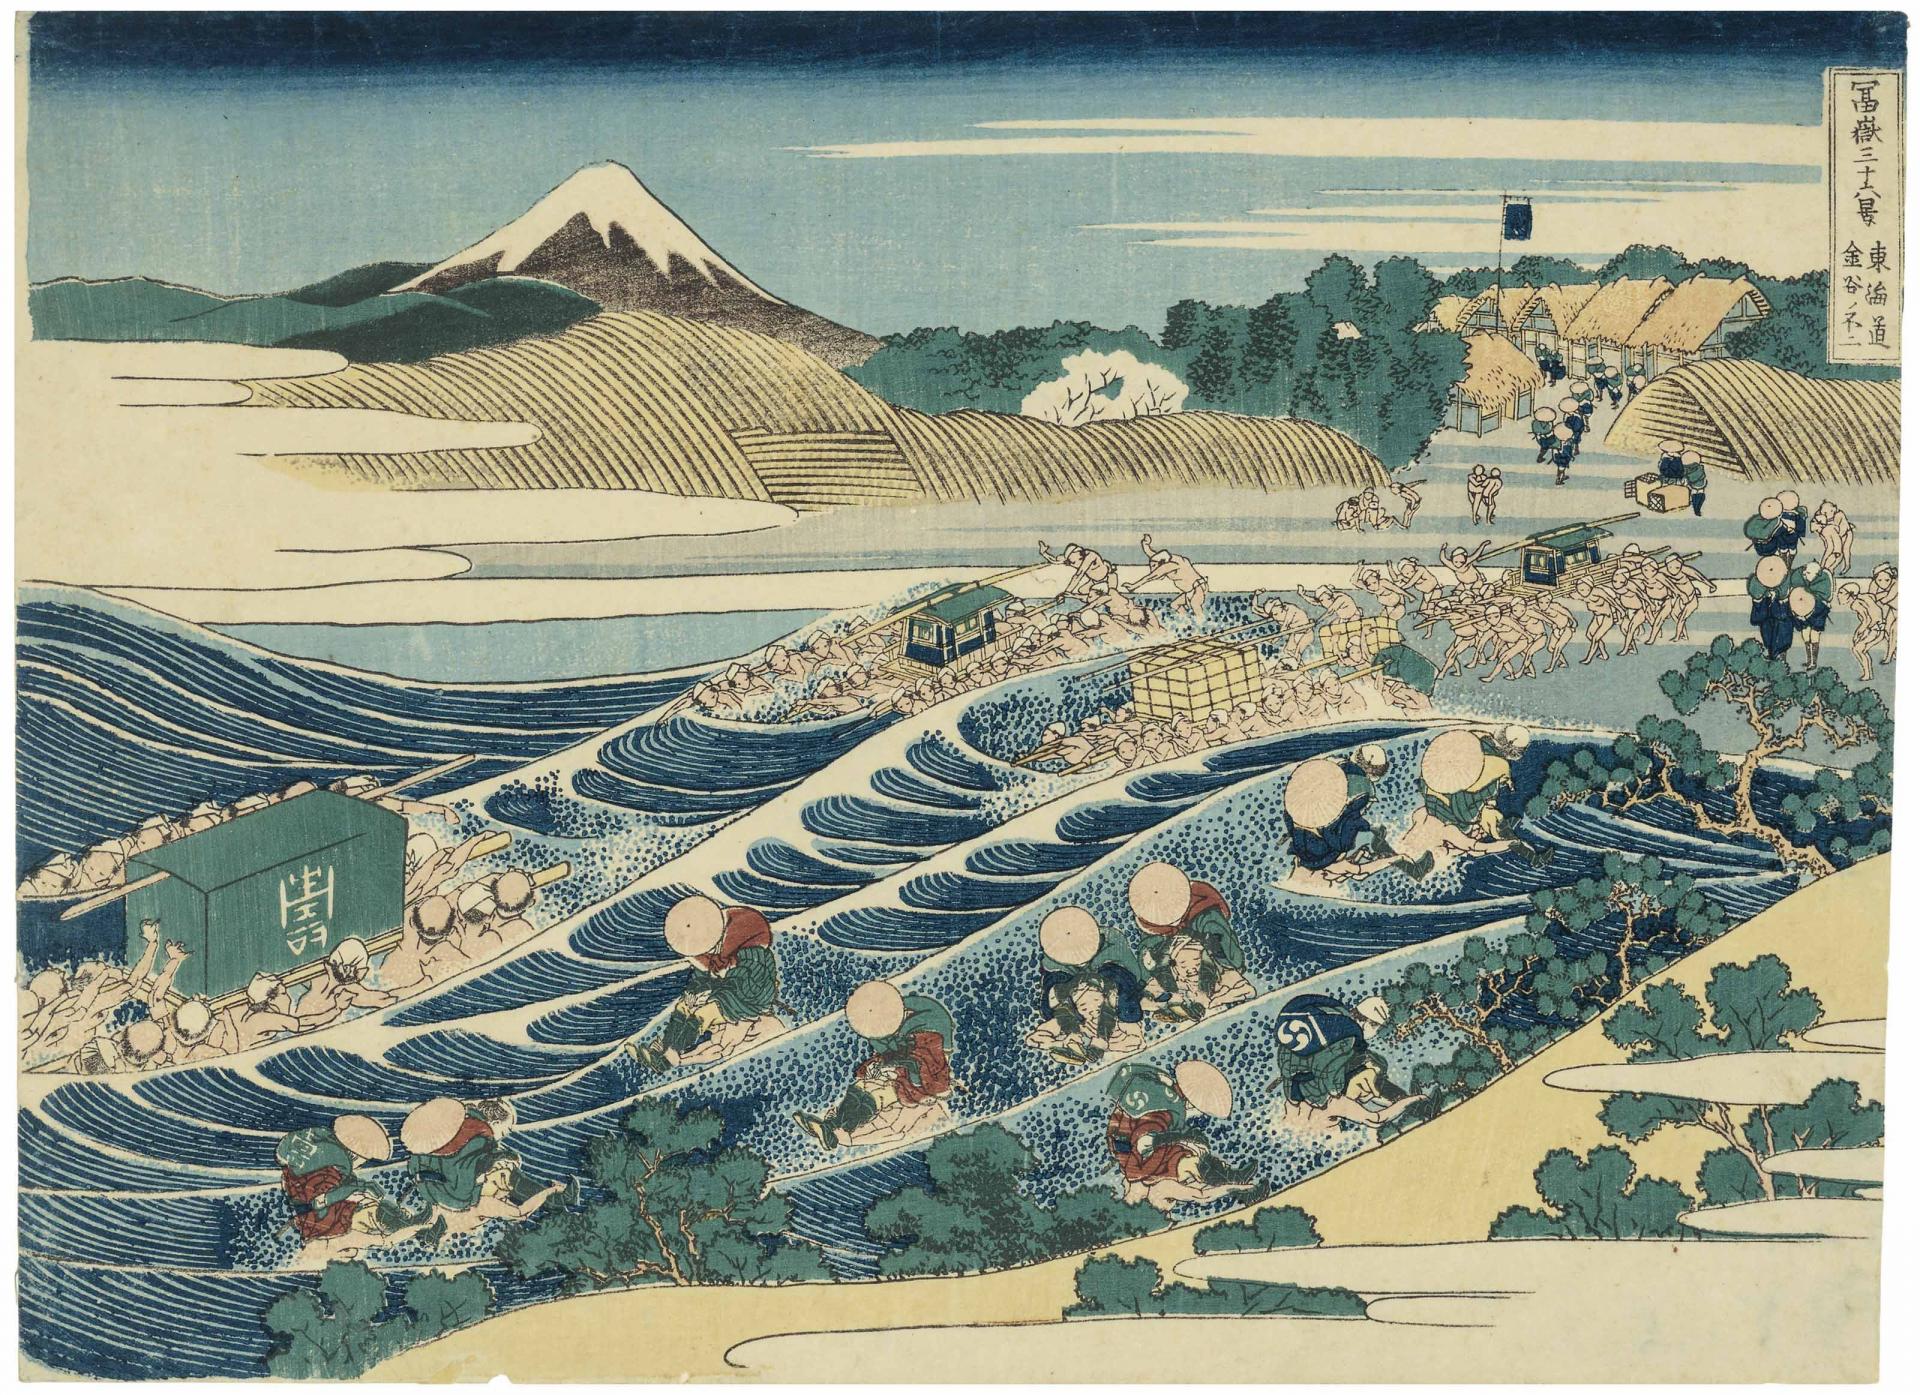 The Most Iconic Japanese Ukiyo-e Artist Whose Name You May Not Know